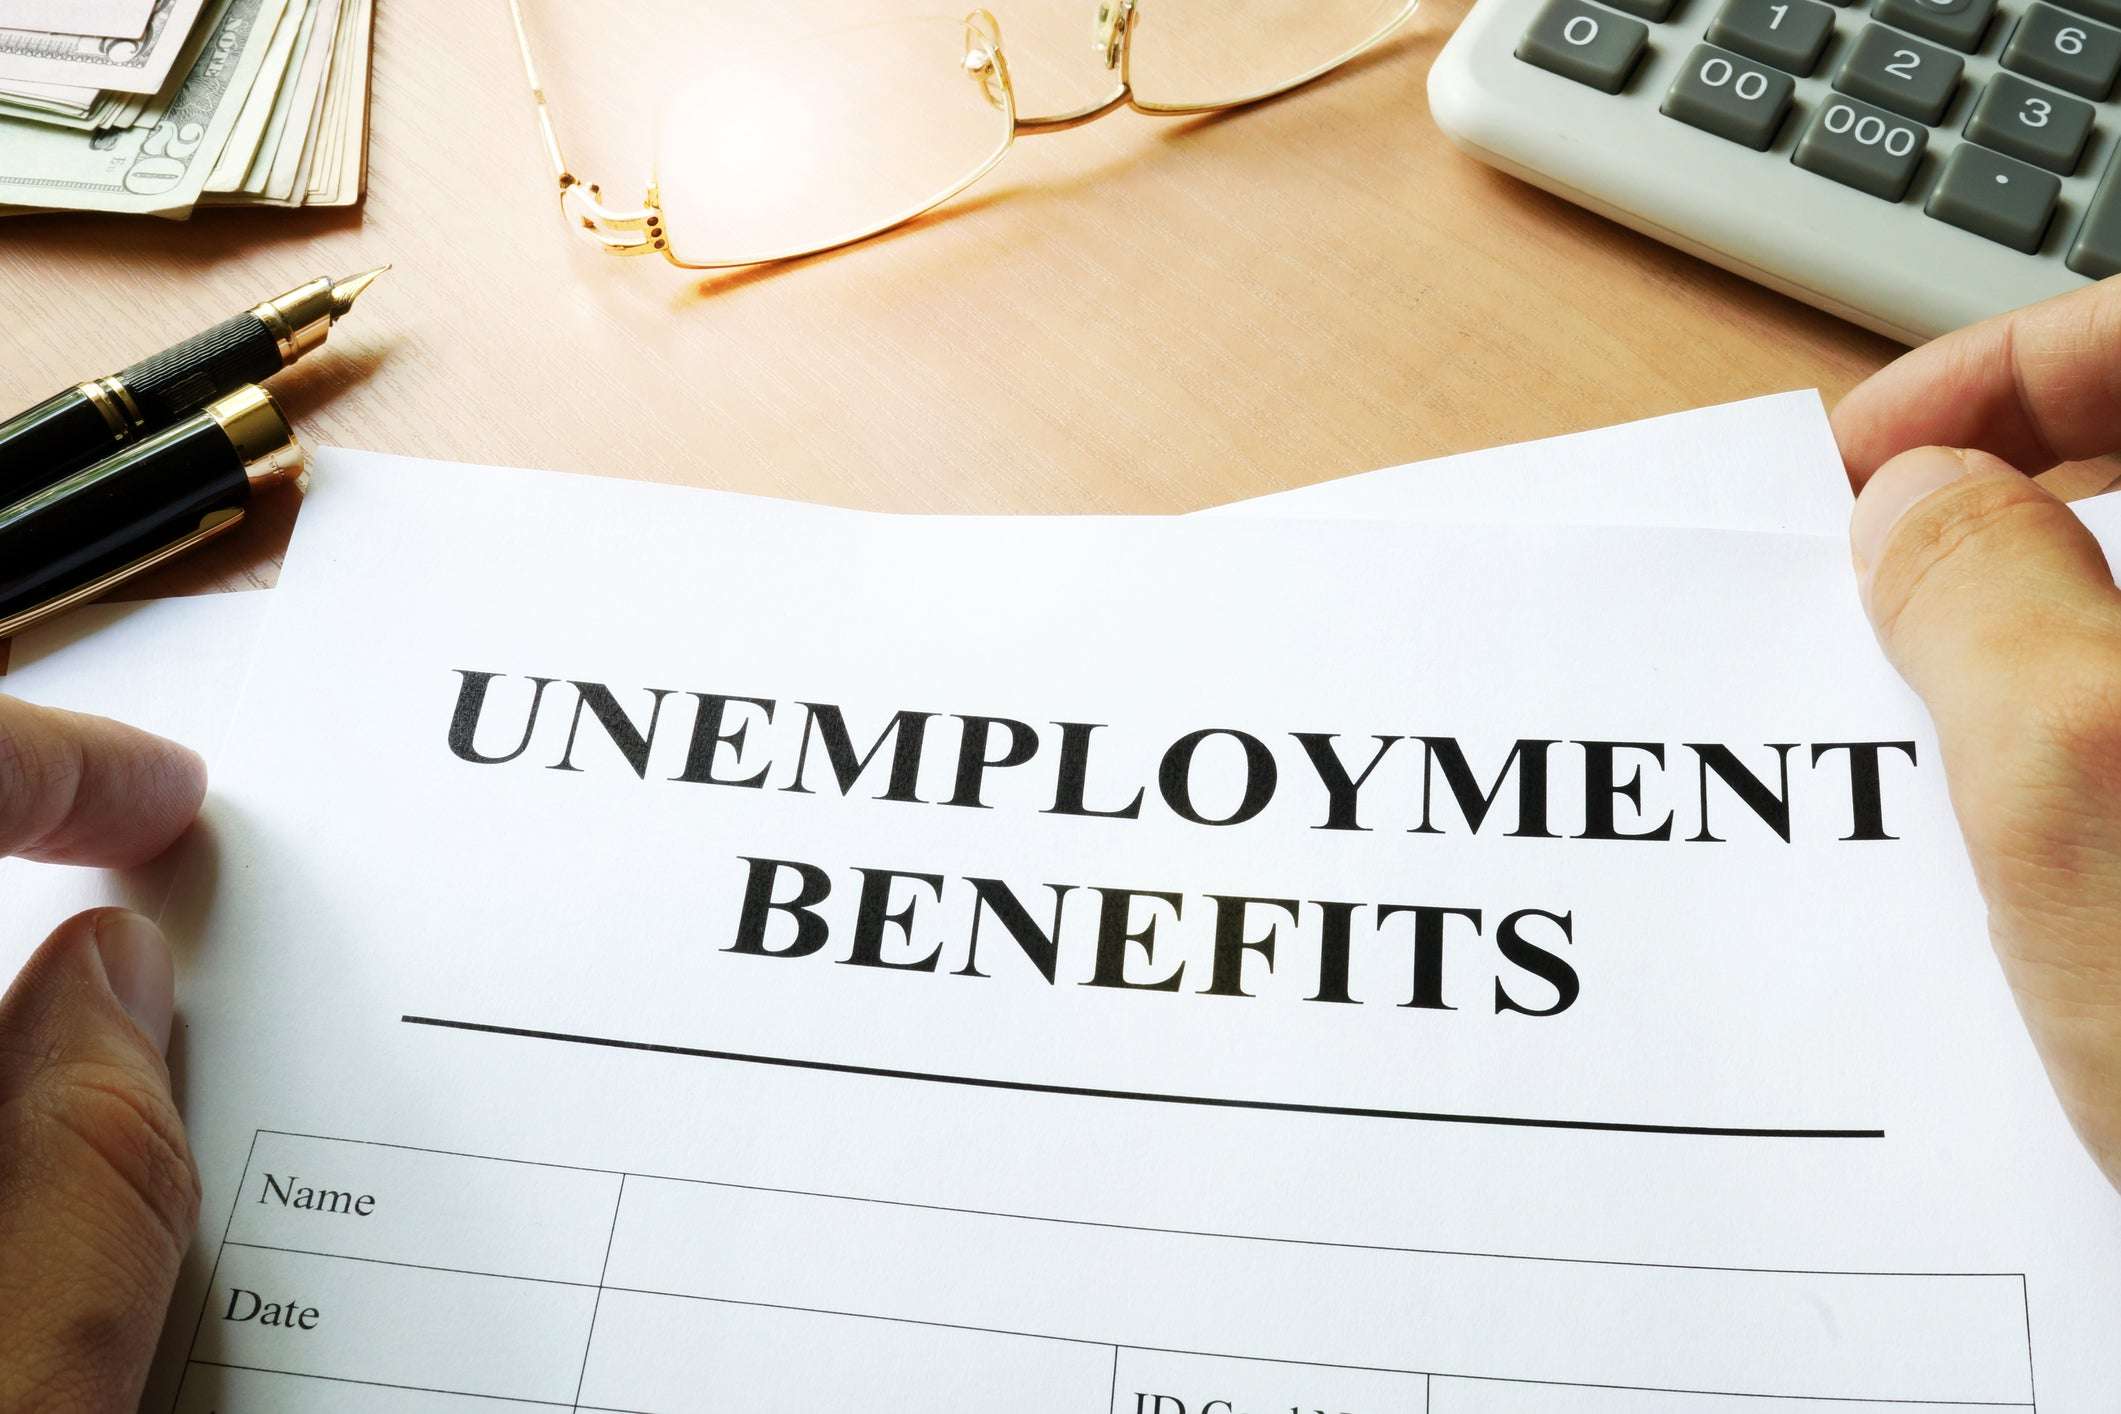 Do I Have to Pay Tax on Unemployment Benefits?